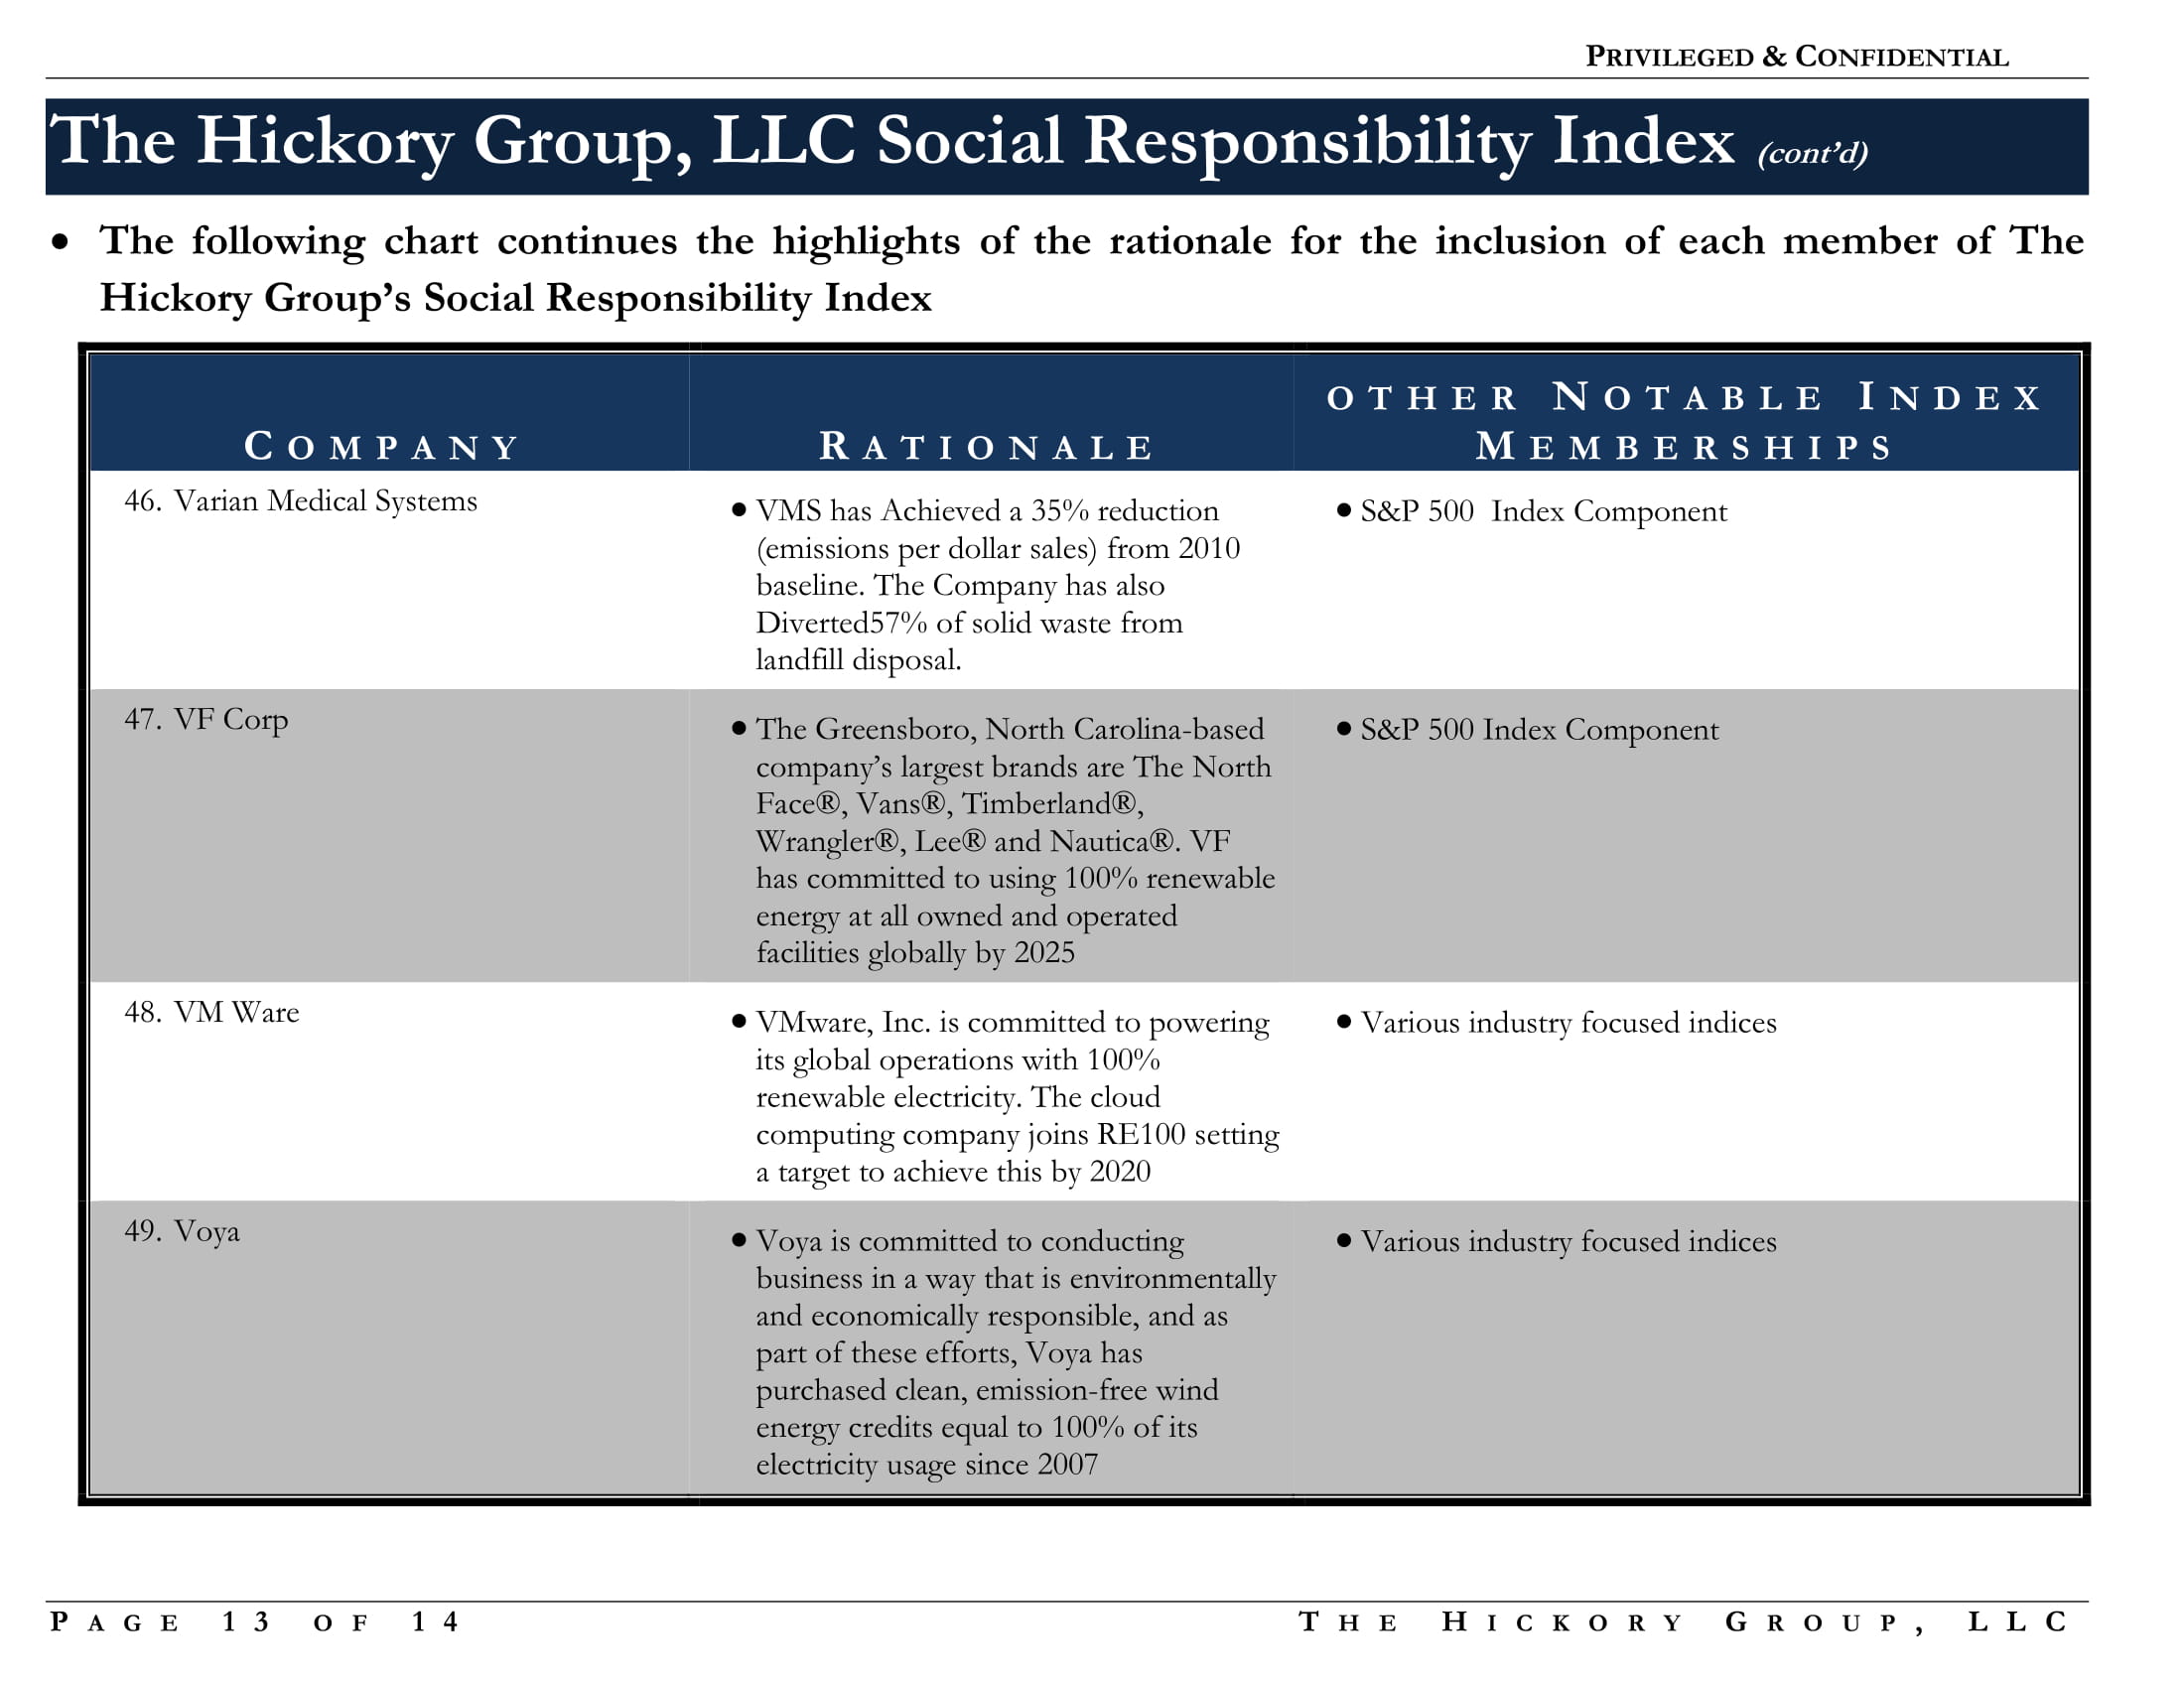 FINAL Social Responsibility Index  Notes and Rationale (7 October 2017) Privileged and Confidential-13.jpg